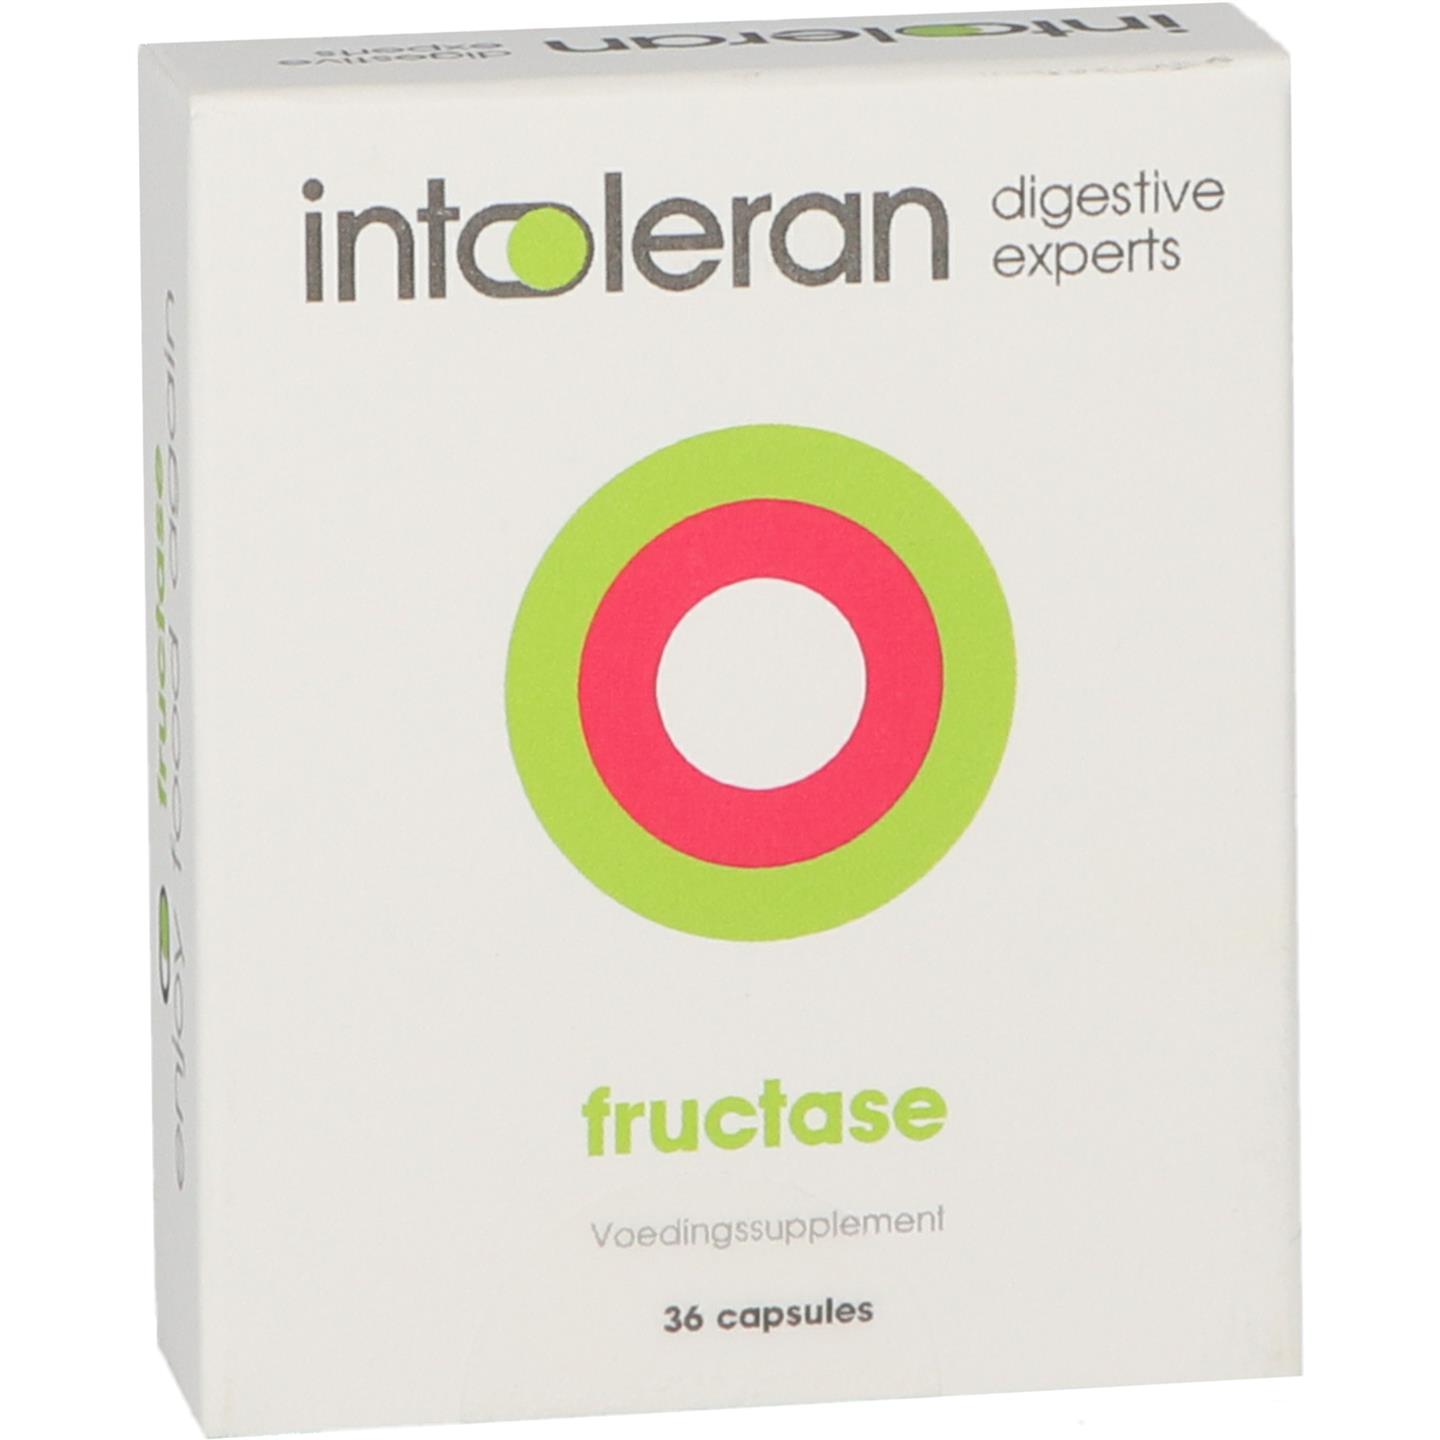 Fructase